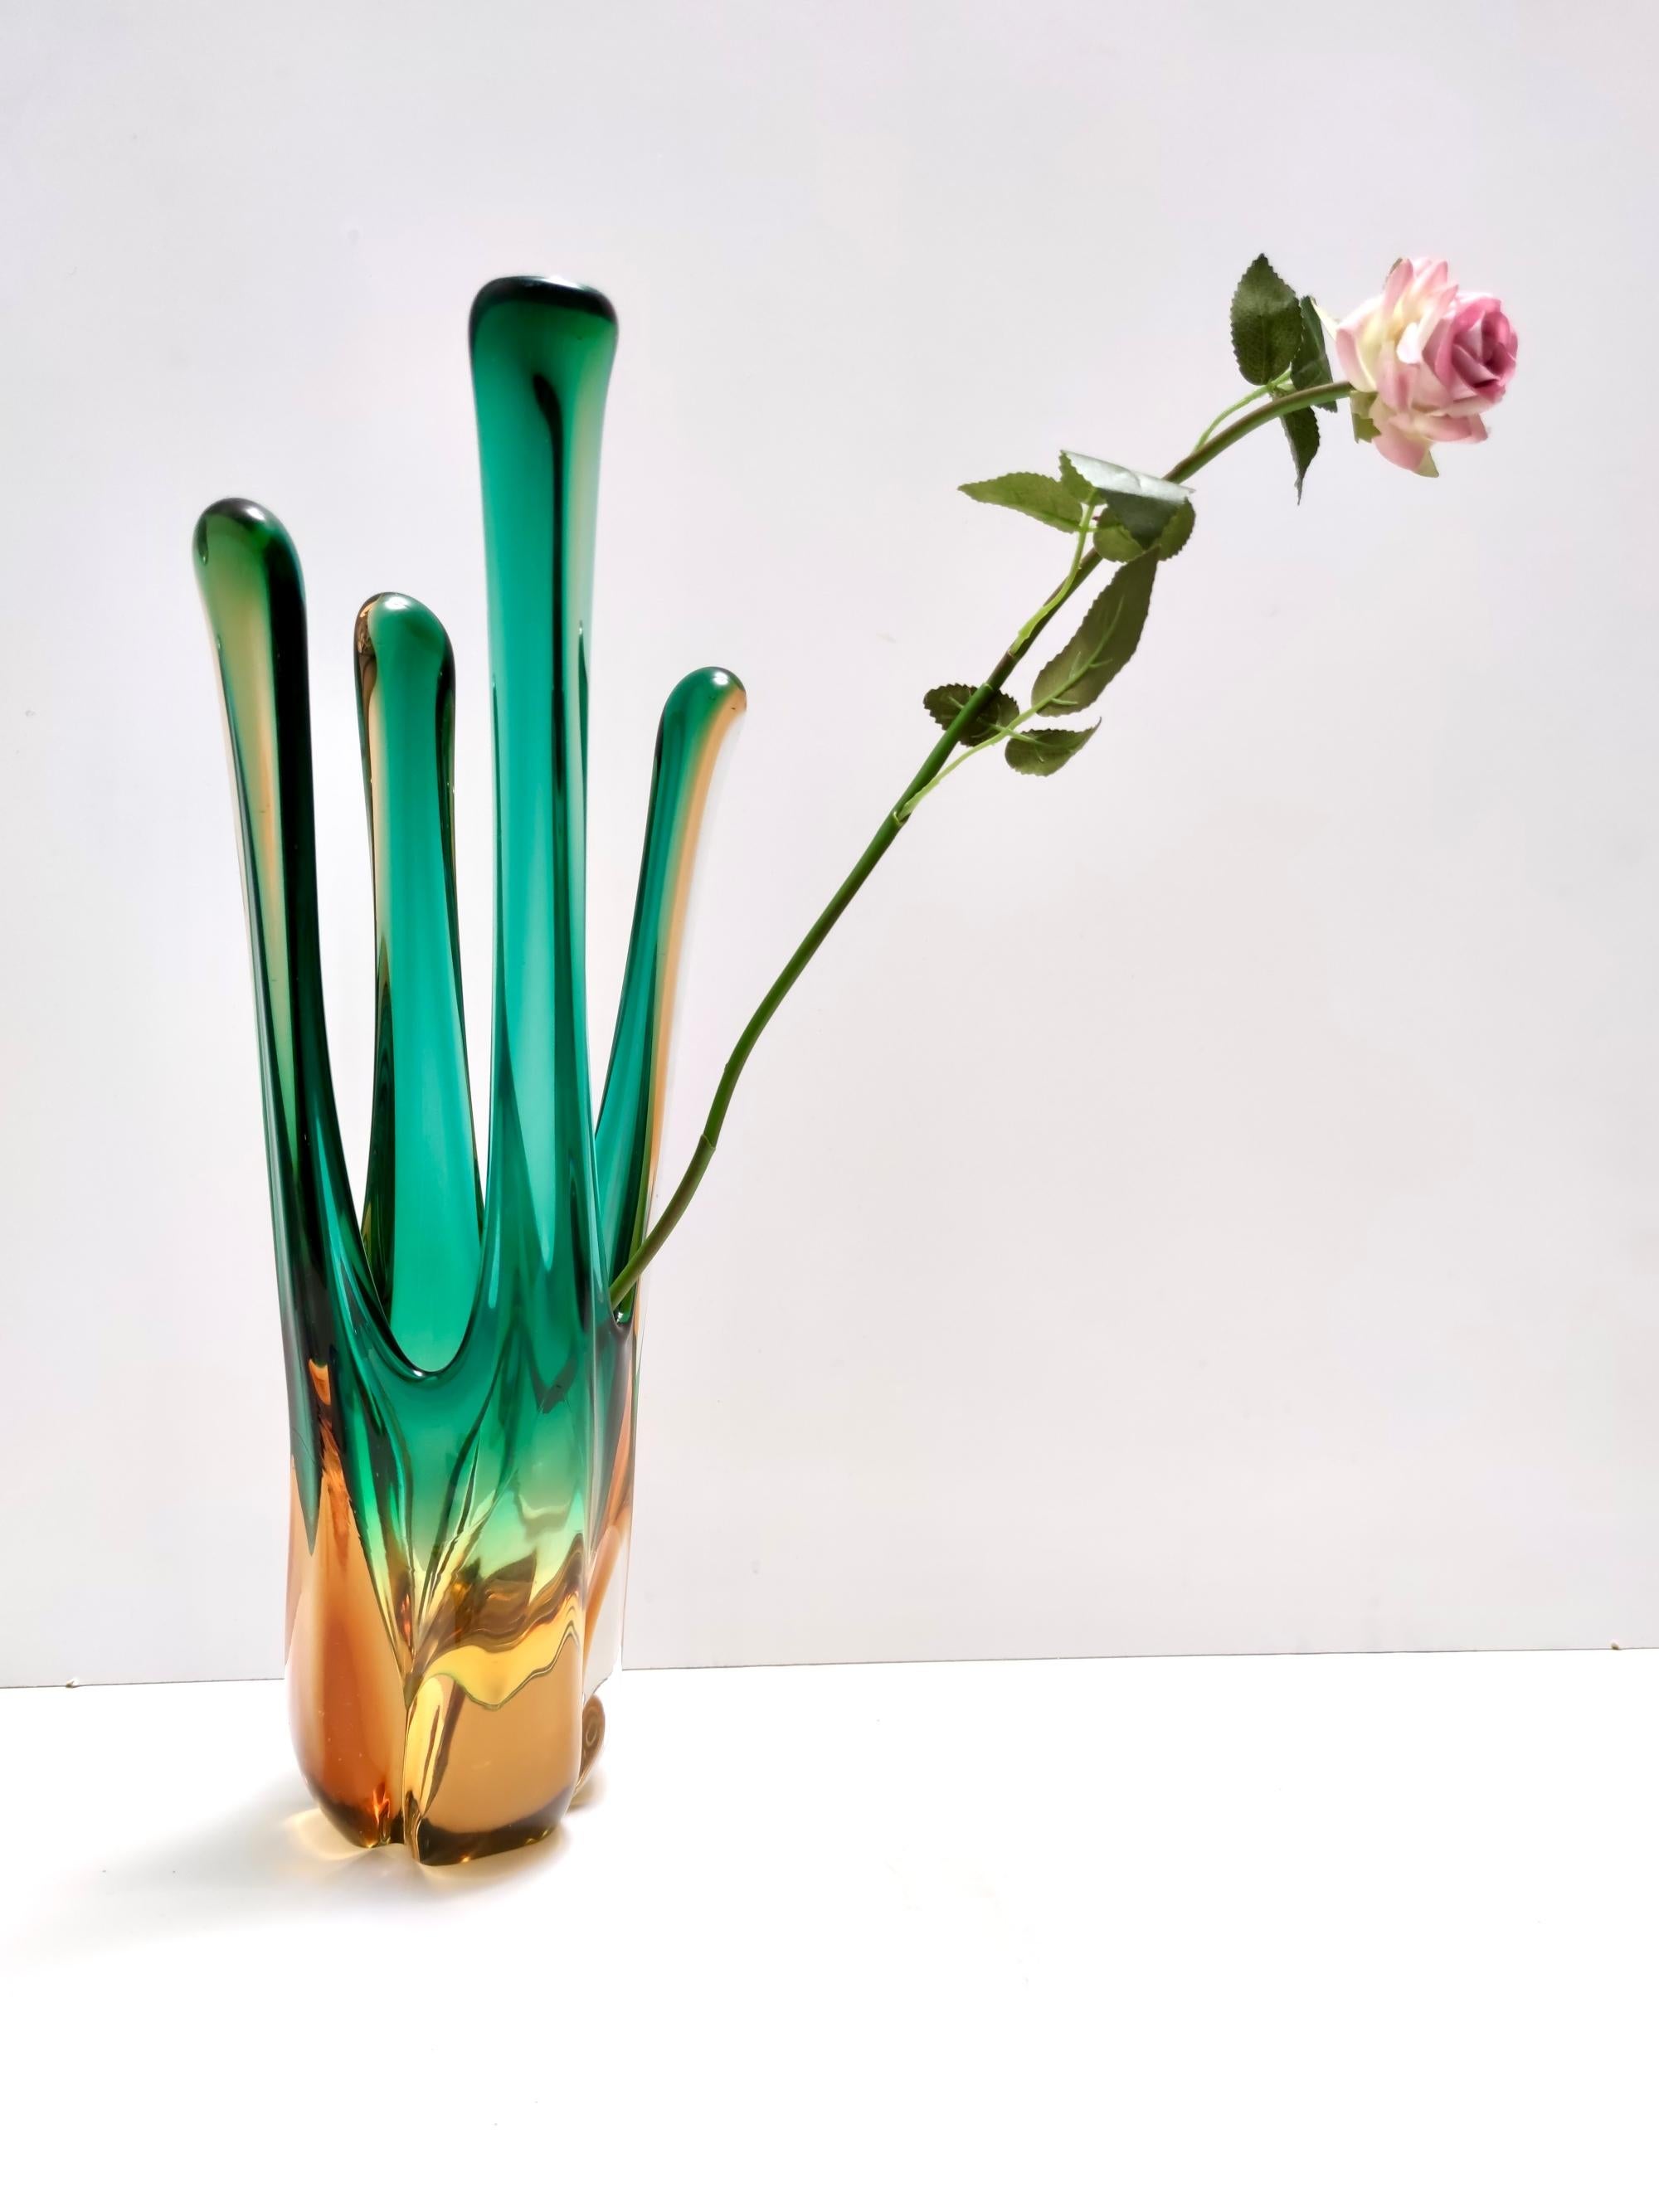 Made in Italy, 1950s - 1960s. 
This beautiful mid-Century modernist Murano glass centrepiece vase is rendered in a lovely green and amber color.
It features a series of elongated arms, creating dynamism and intrigue in the piece, an elegant form